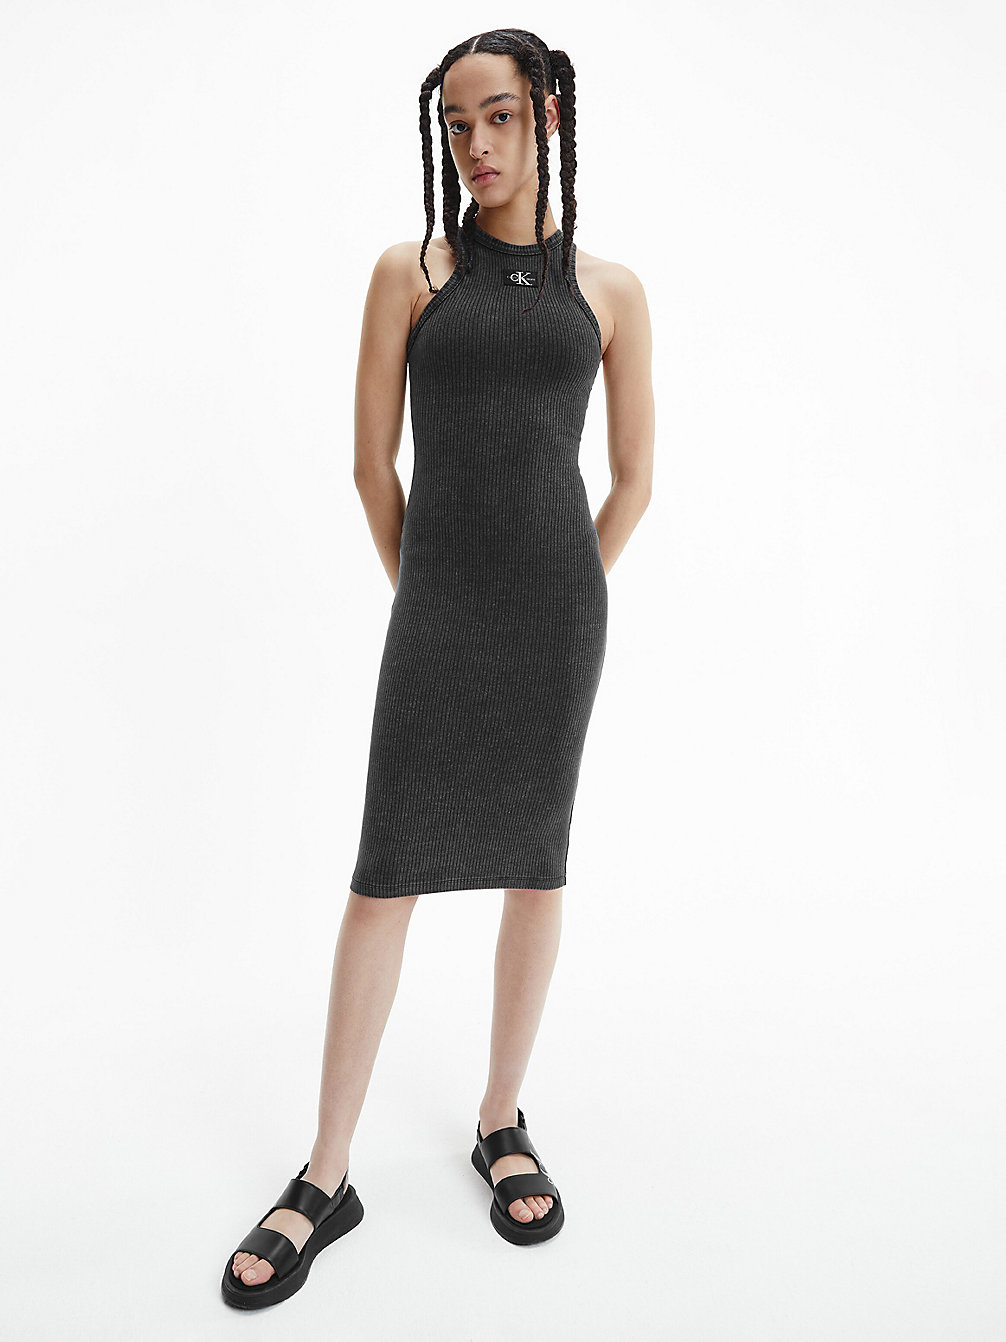 WASHED BLACK Ribbed Jersey Bodycon Dress undefined women Calvin Klein